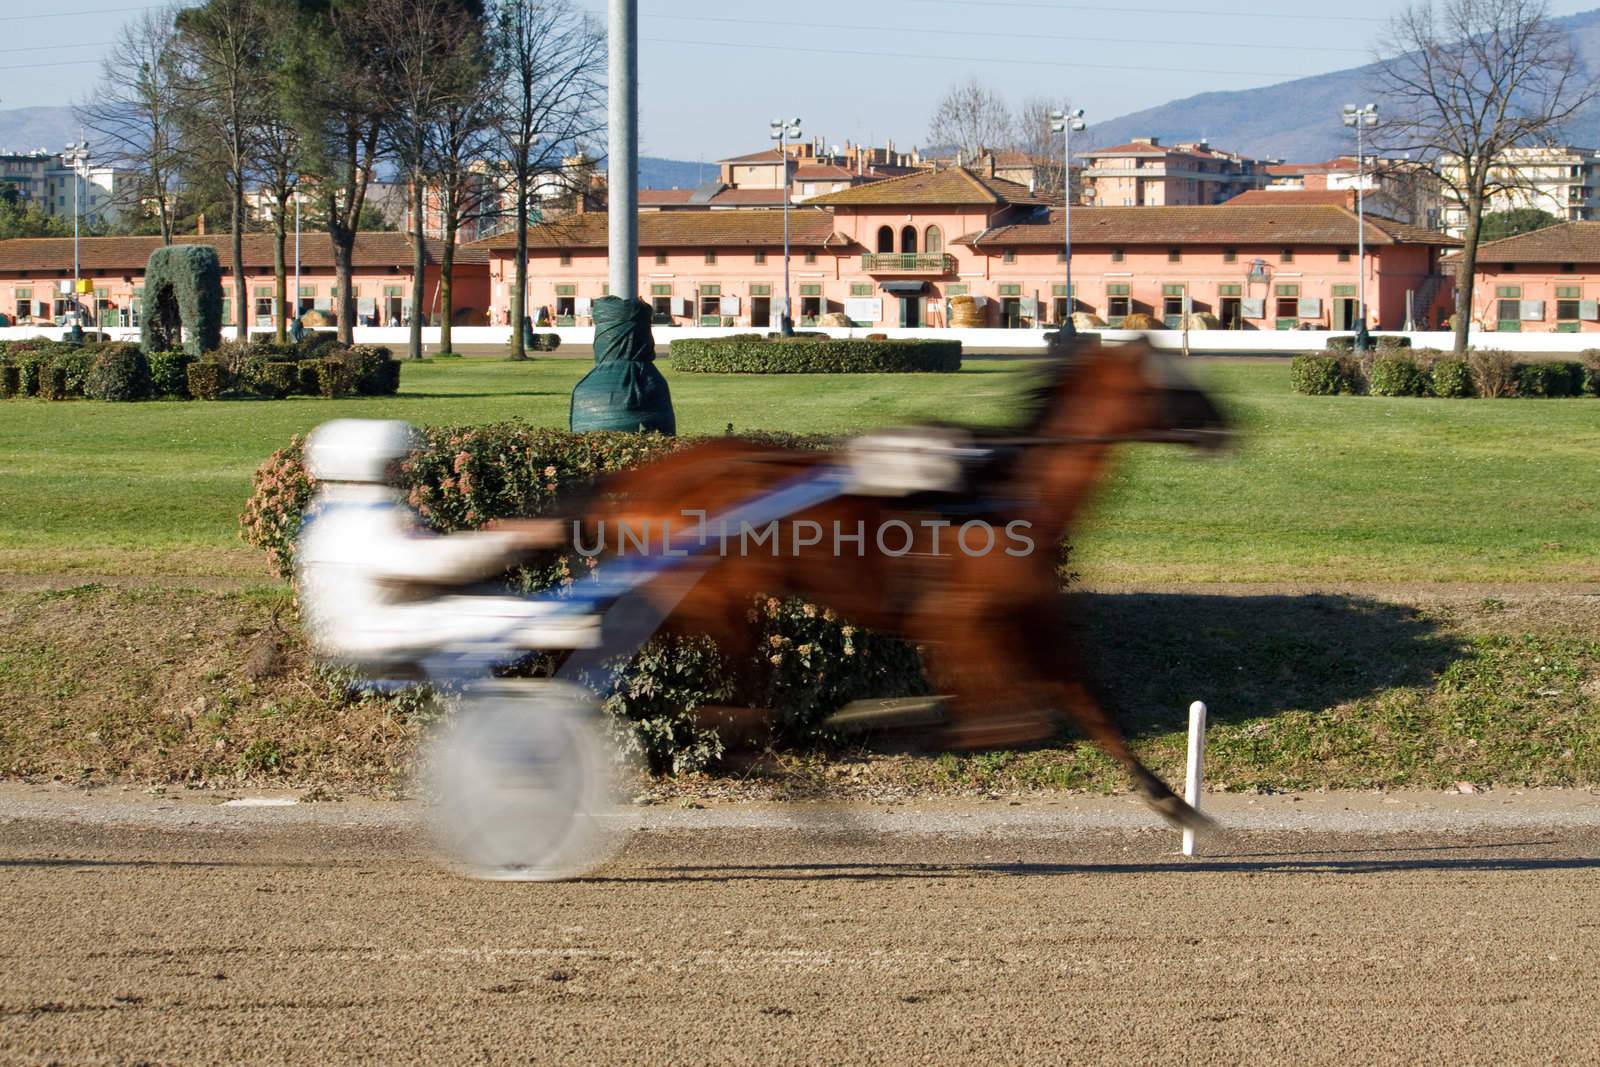 An image of horse trotting cart race competition